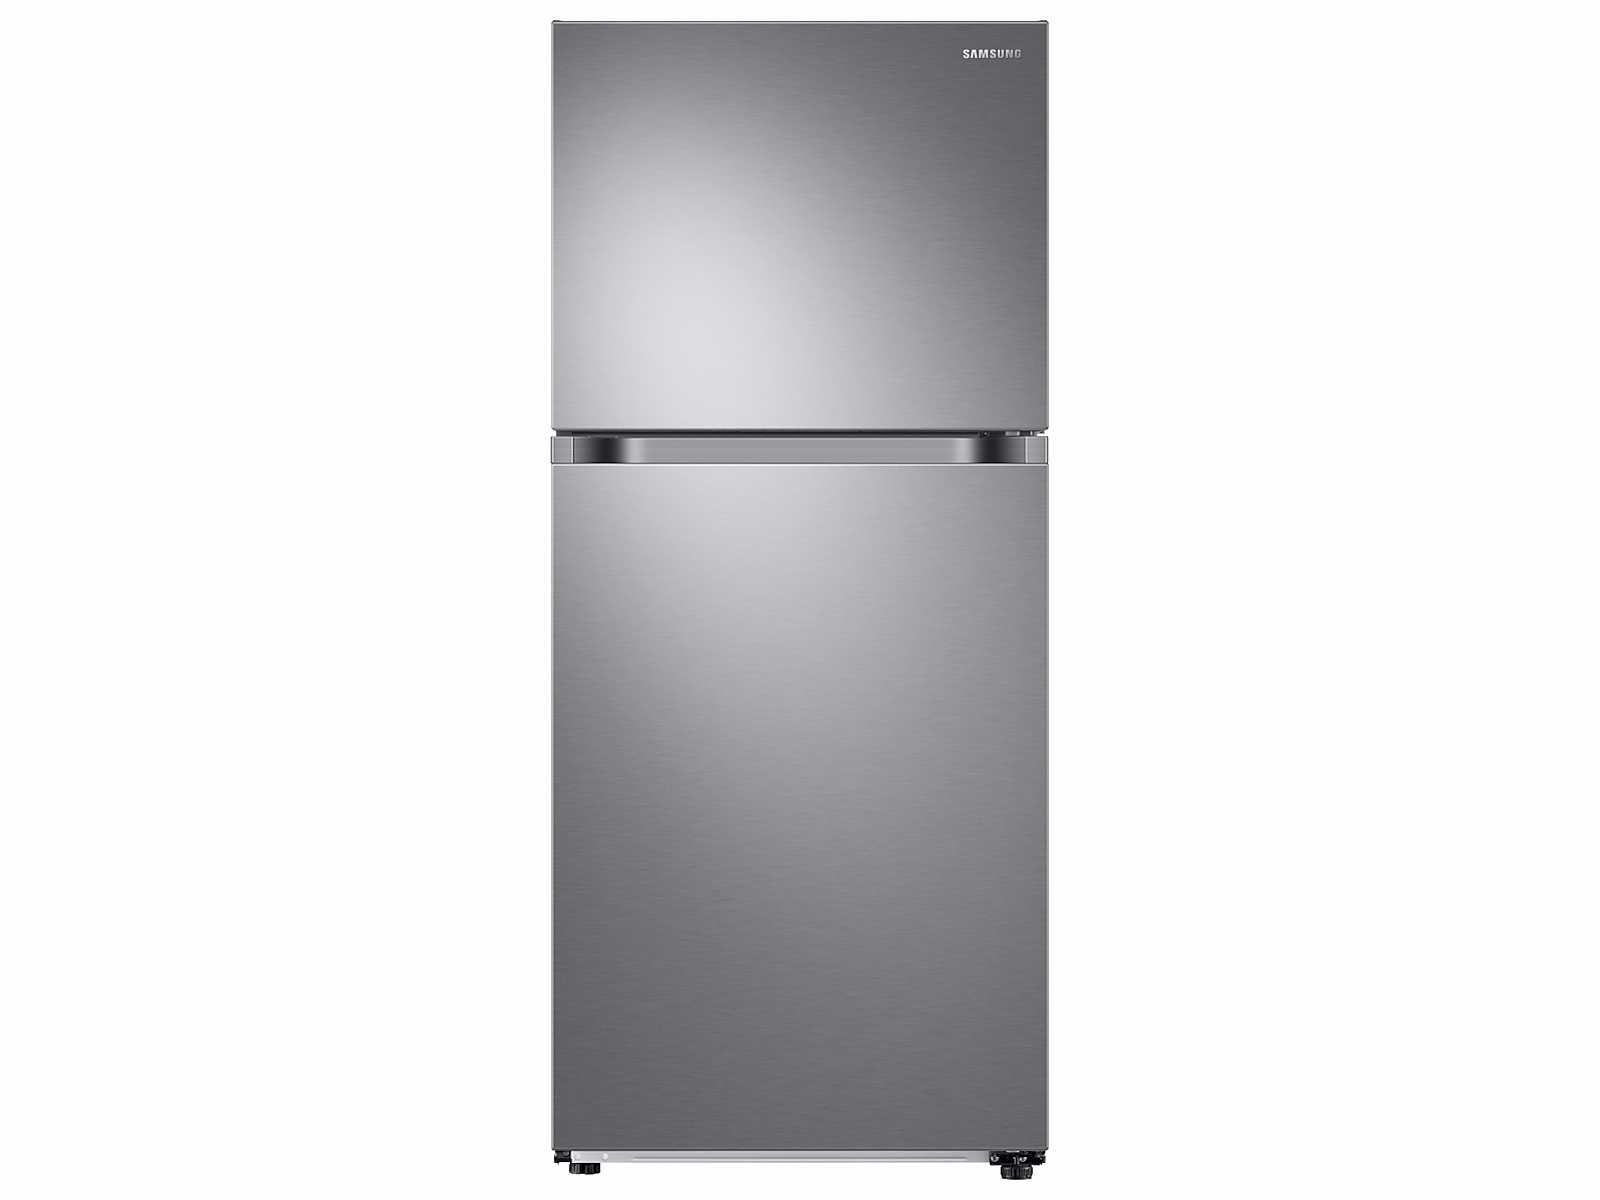 Samsung 18 cu. ft. Top Freezer Refrigerator with FlexZone™ and Ice Maker in Silver(RT18M6215SR/AA)